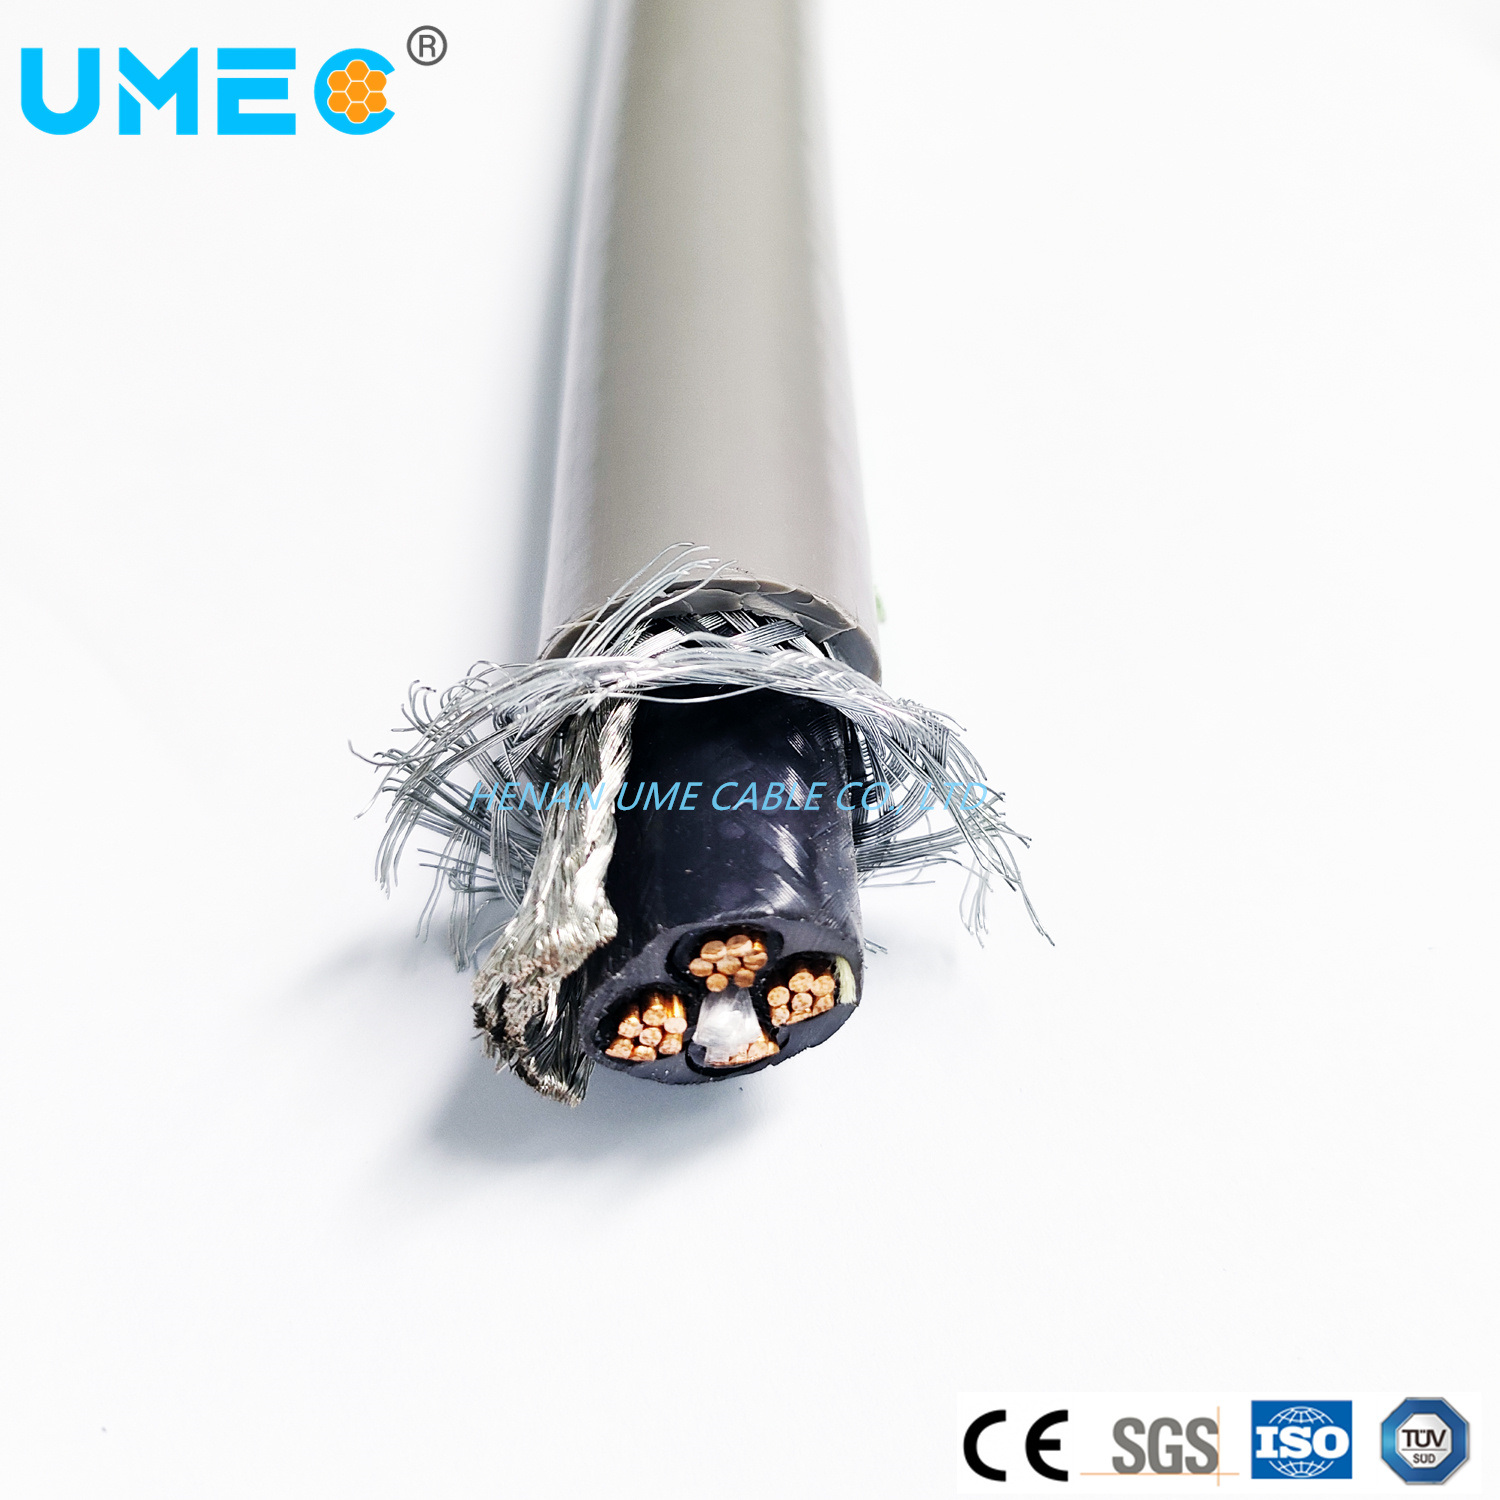 Underground Earthing Cable Galvanized Steel Braiding Shielding 4core Ymvkas Kabel Cable